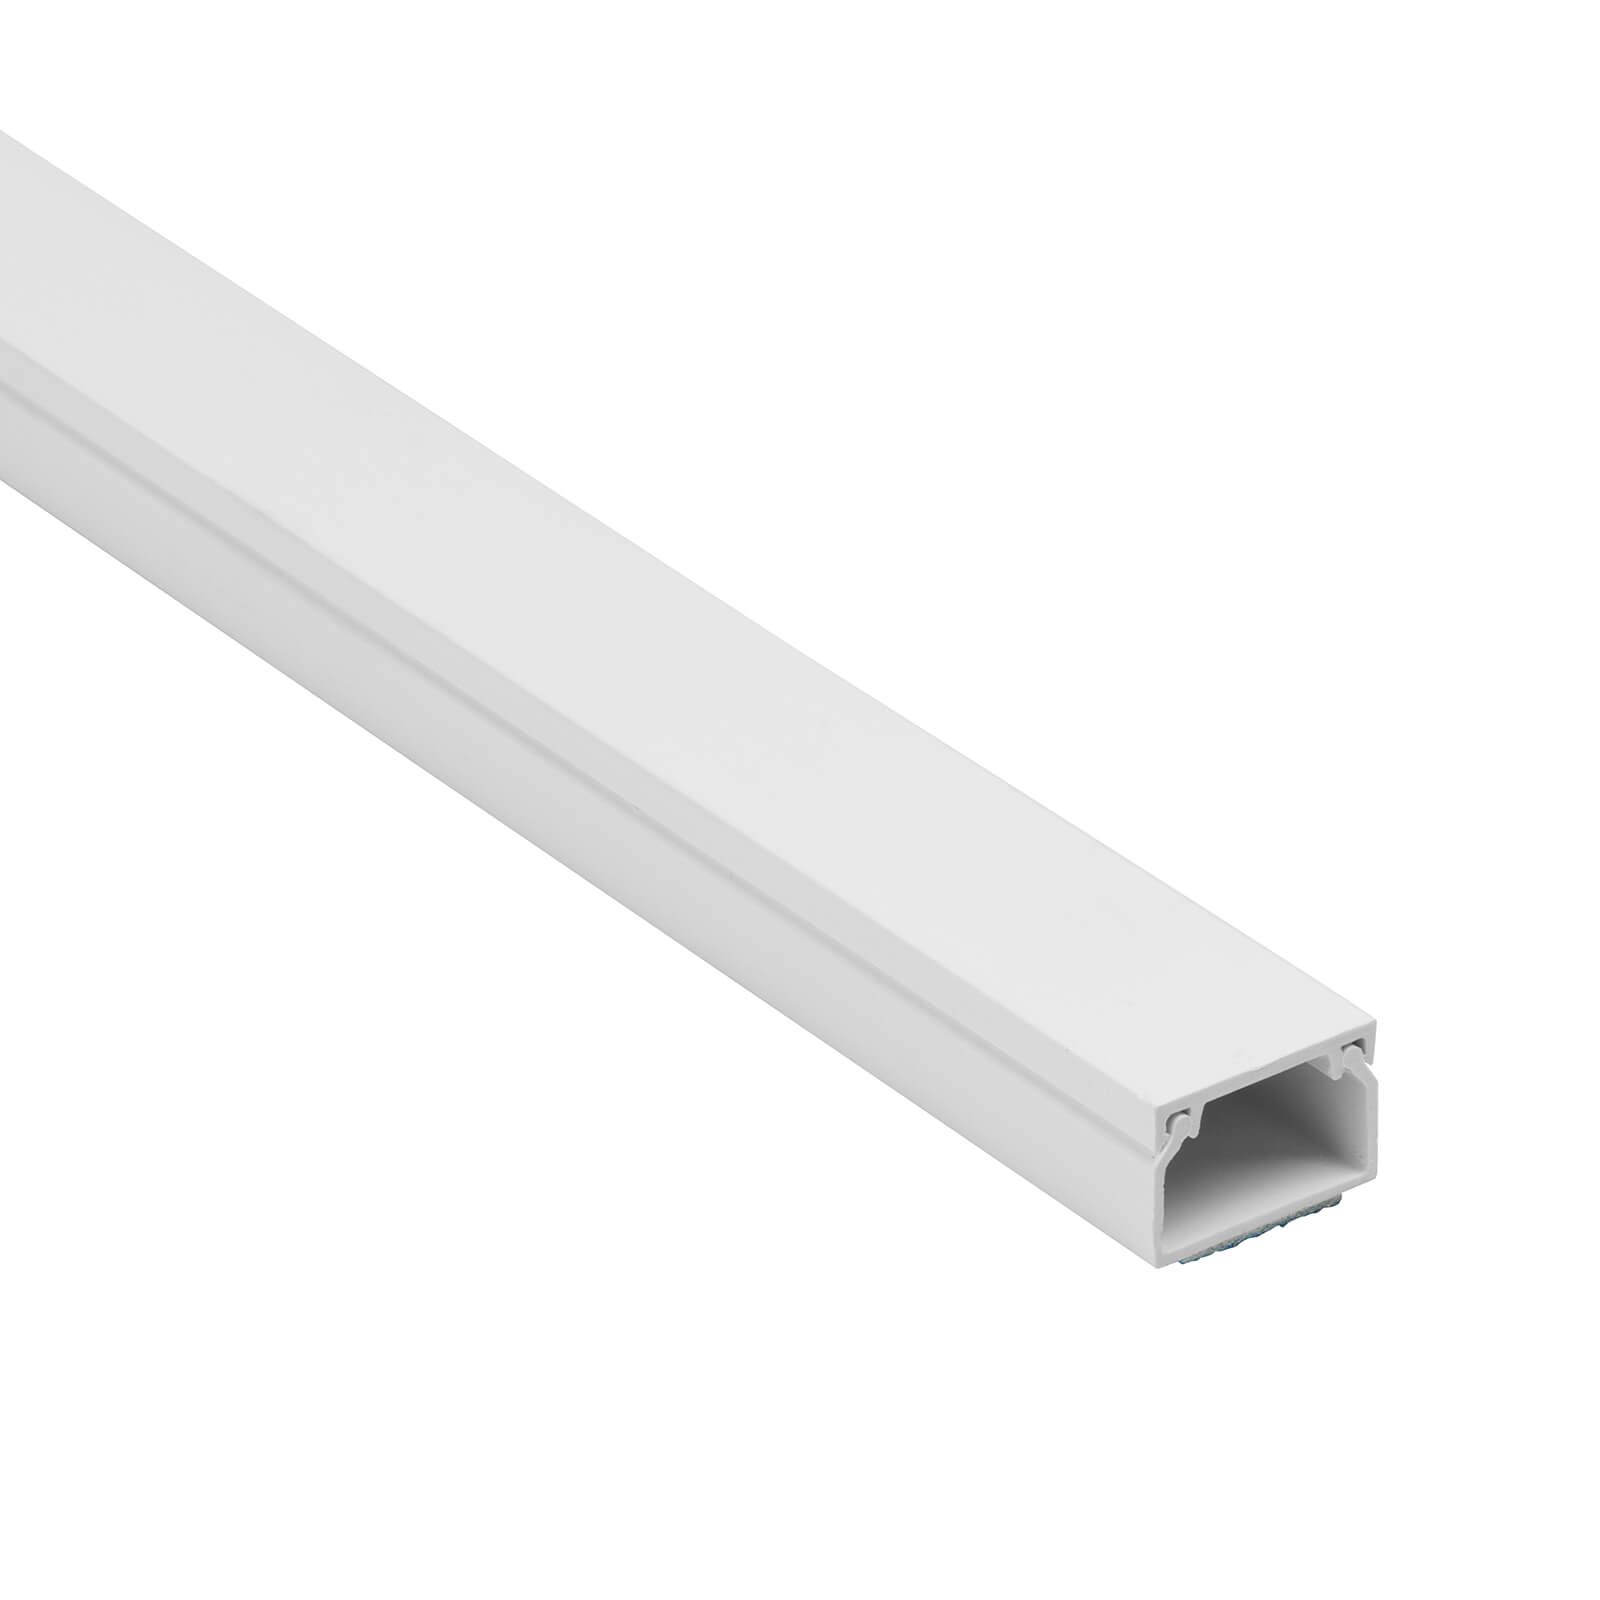 Photo of D-line Trunking - 25mm X 16mm X 2m Length - White